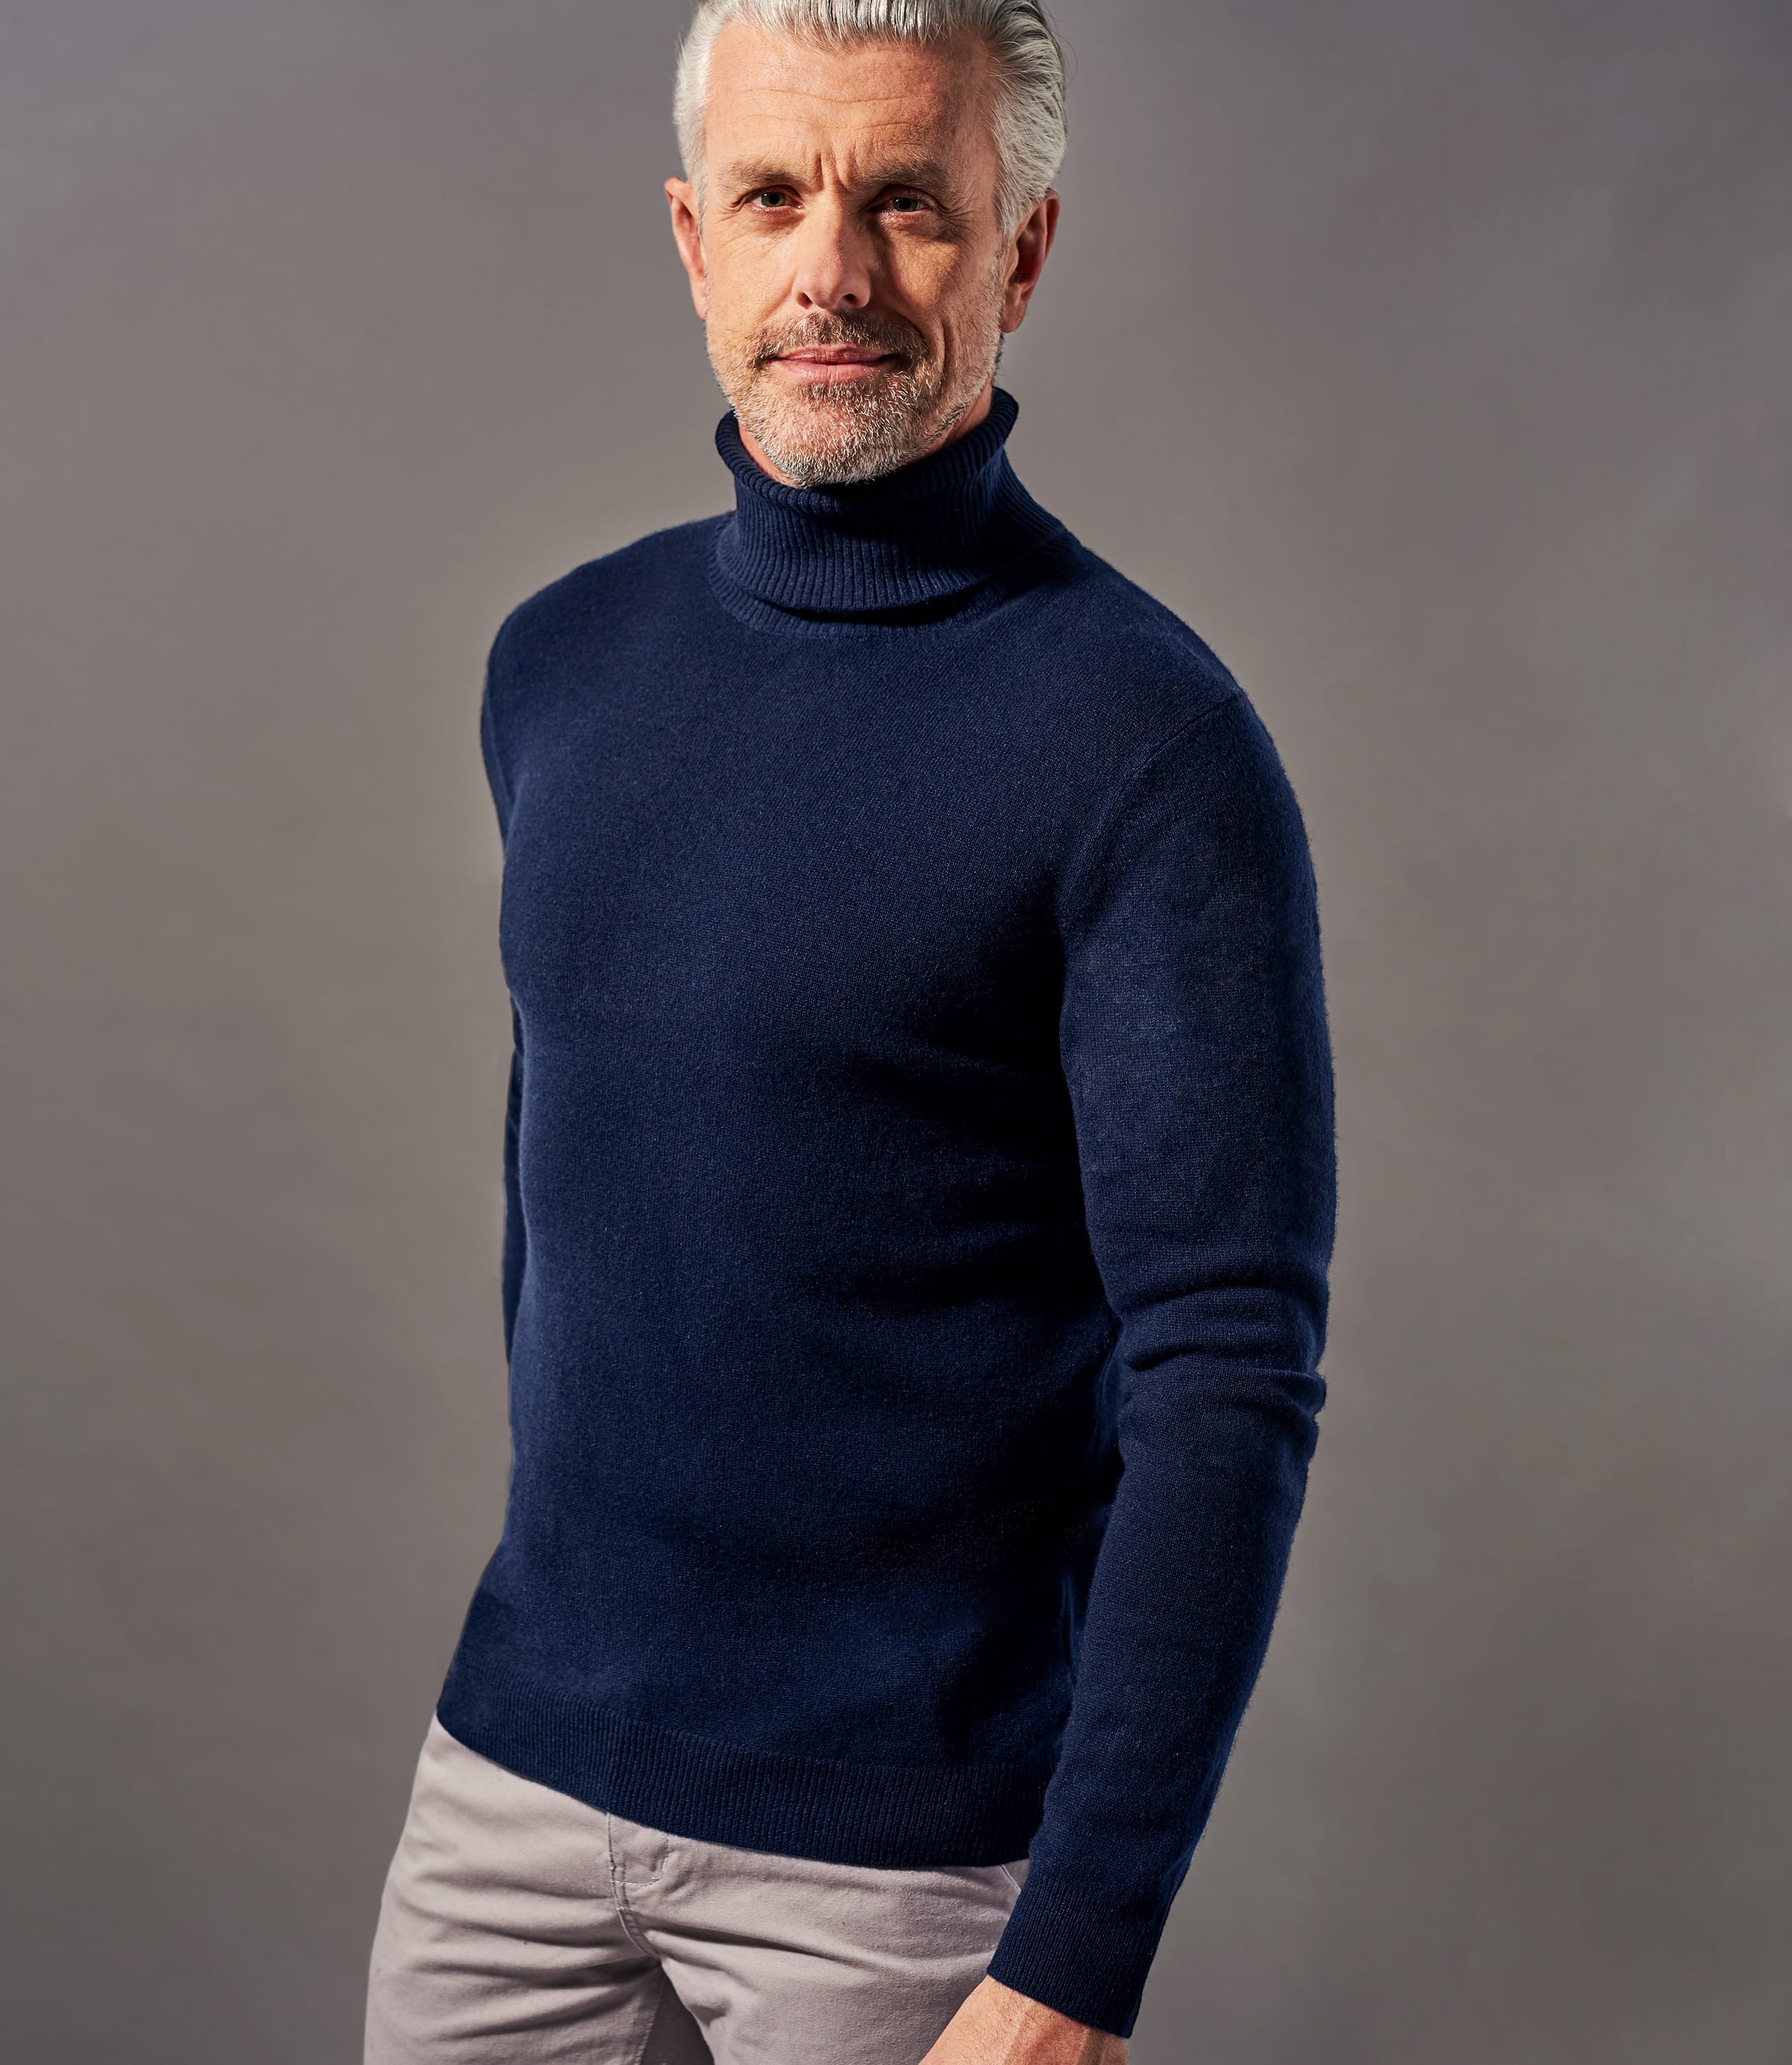 Men's Polo Neck Jumpers & Sweaters | WoolOvers